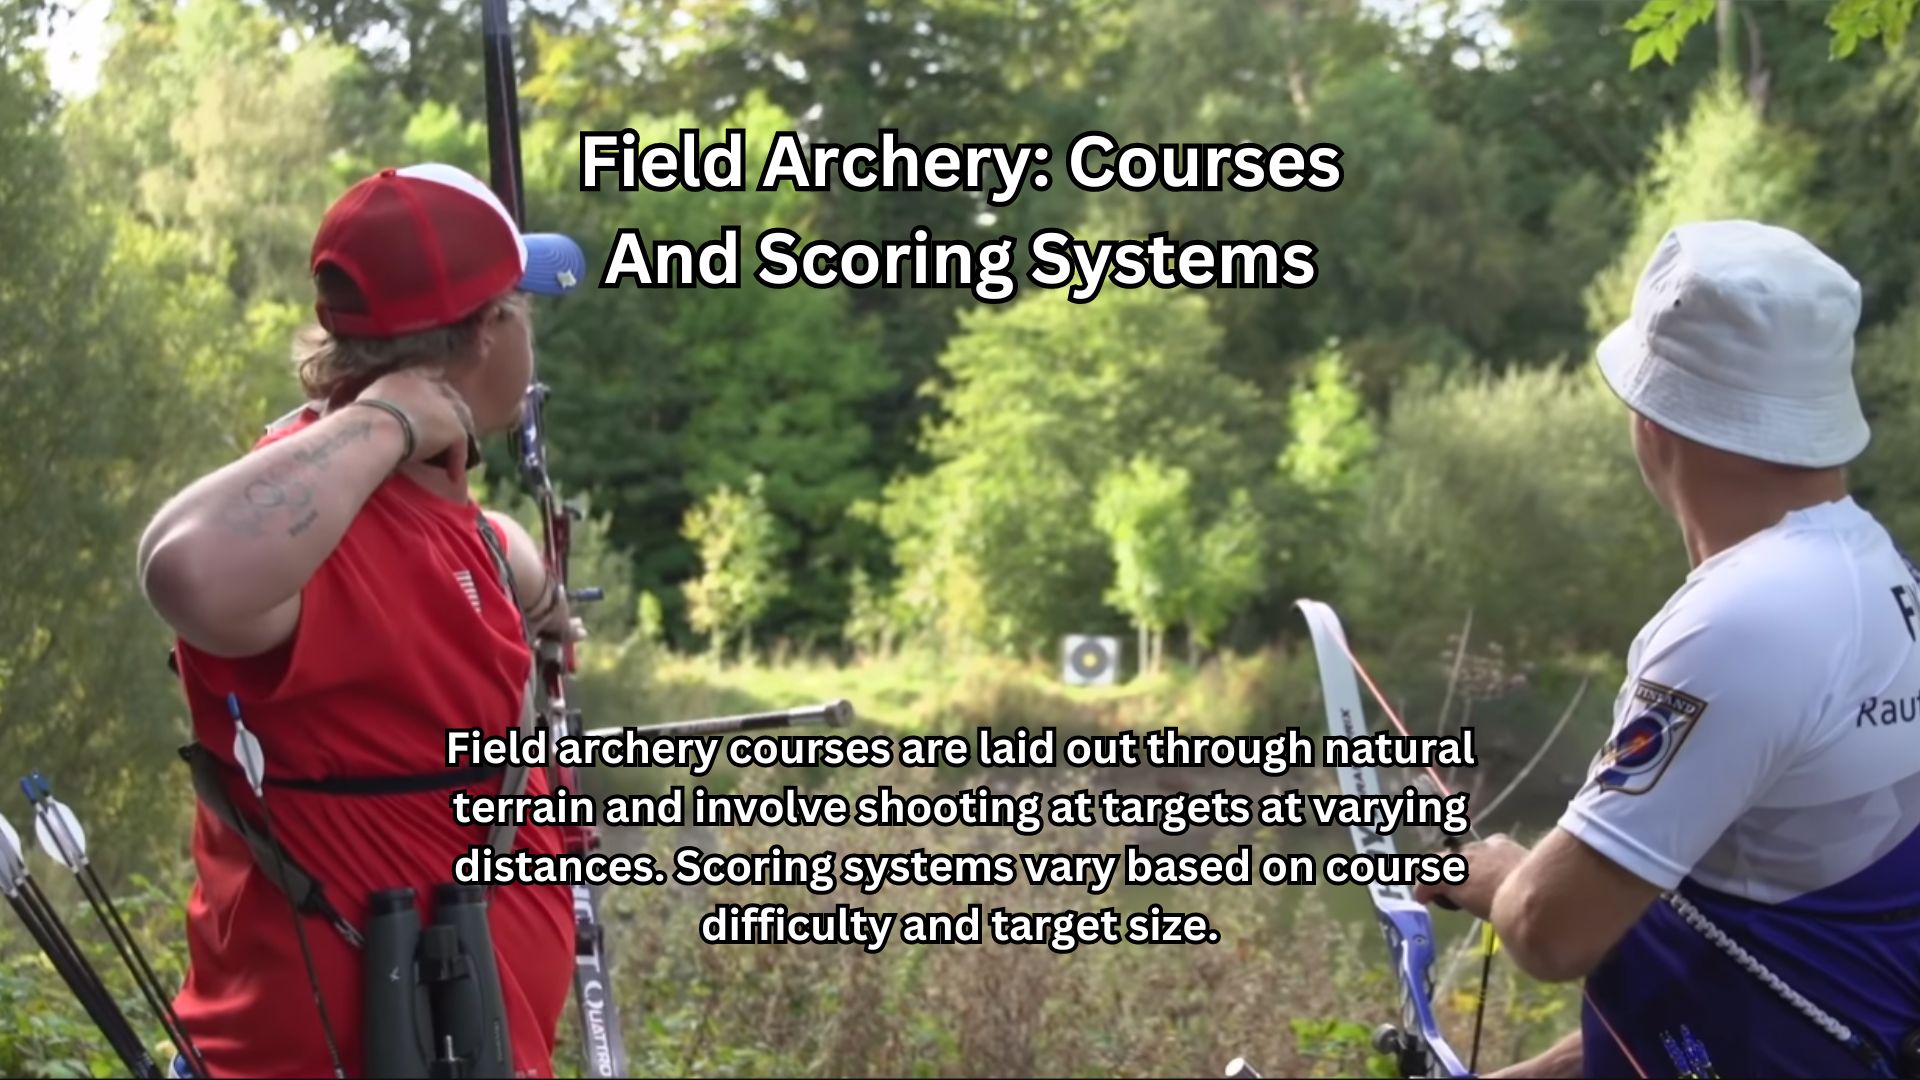 Field Archery Courses And Scoring Systems